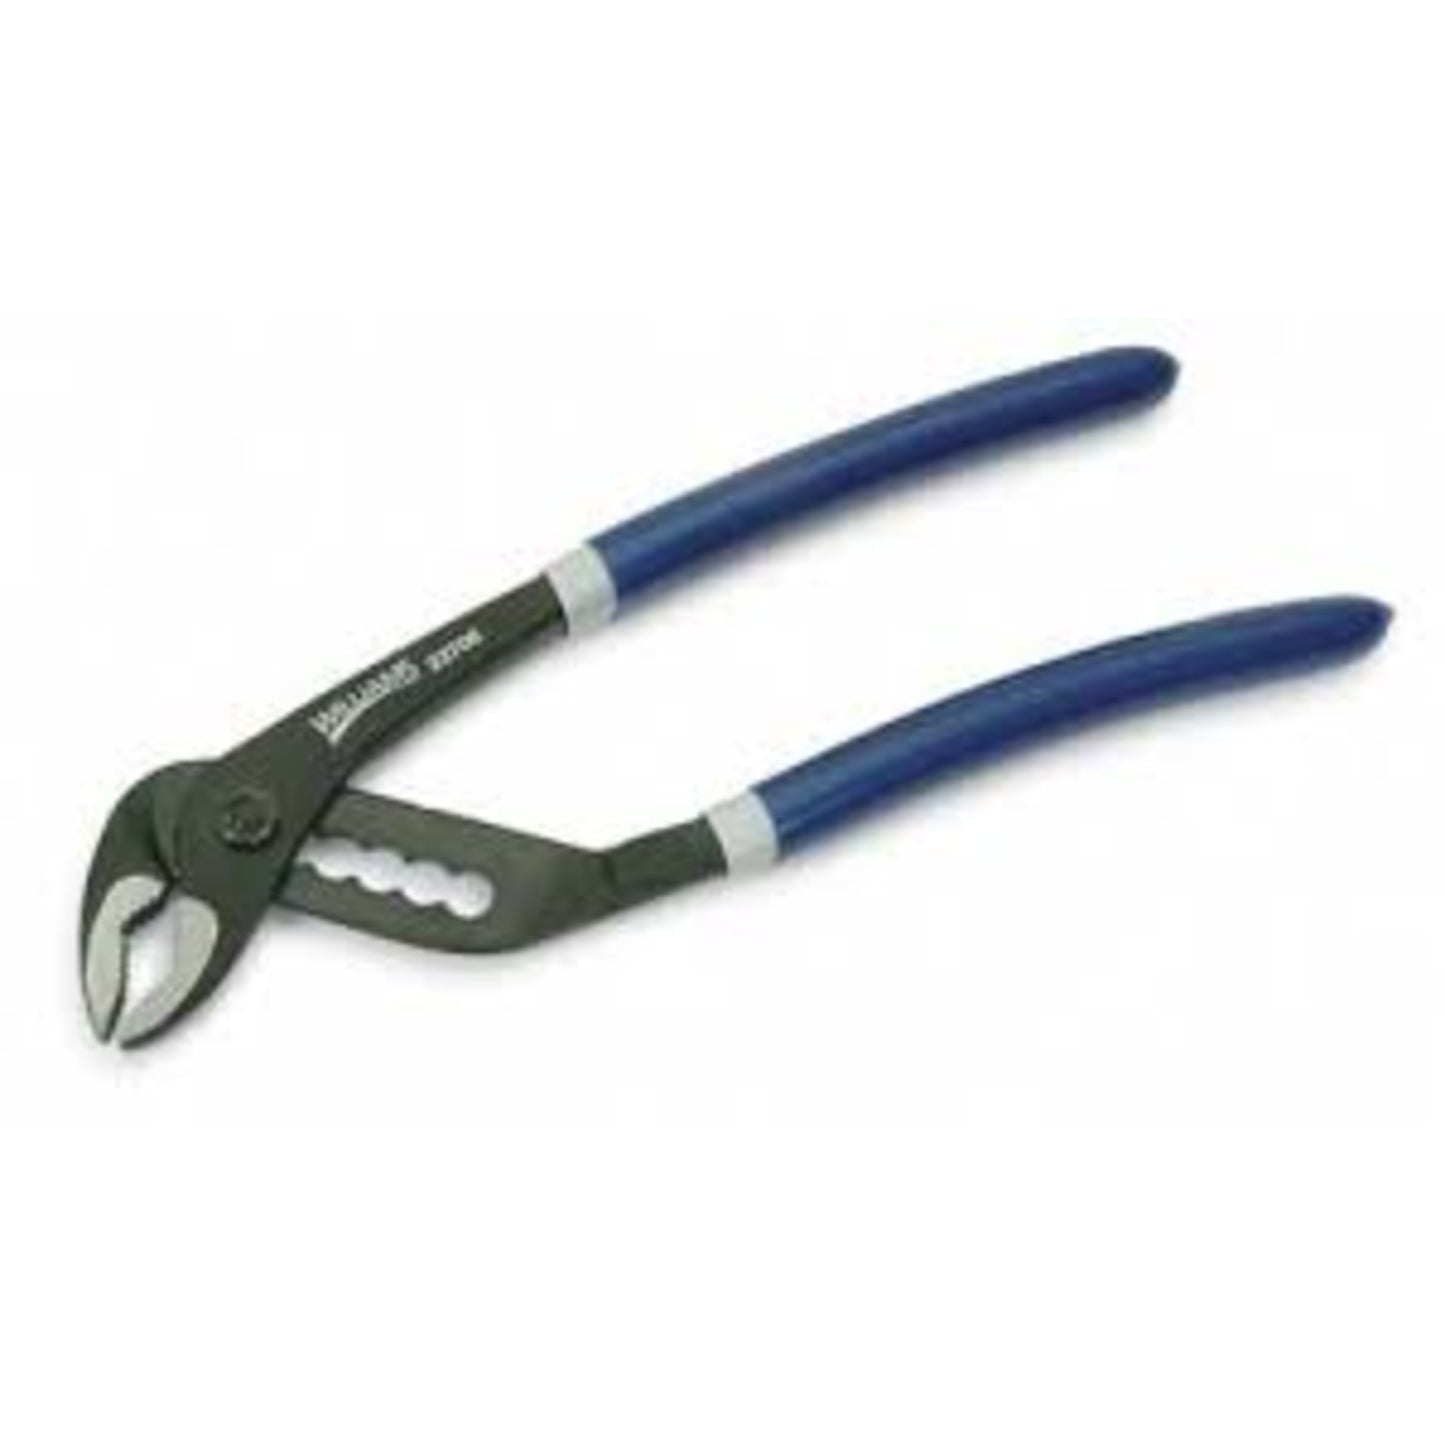 Williams 23706, 9-1/2" Joint Pliers